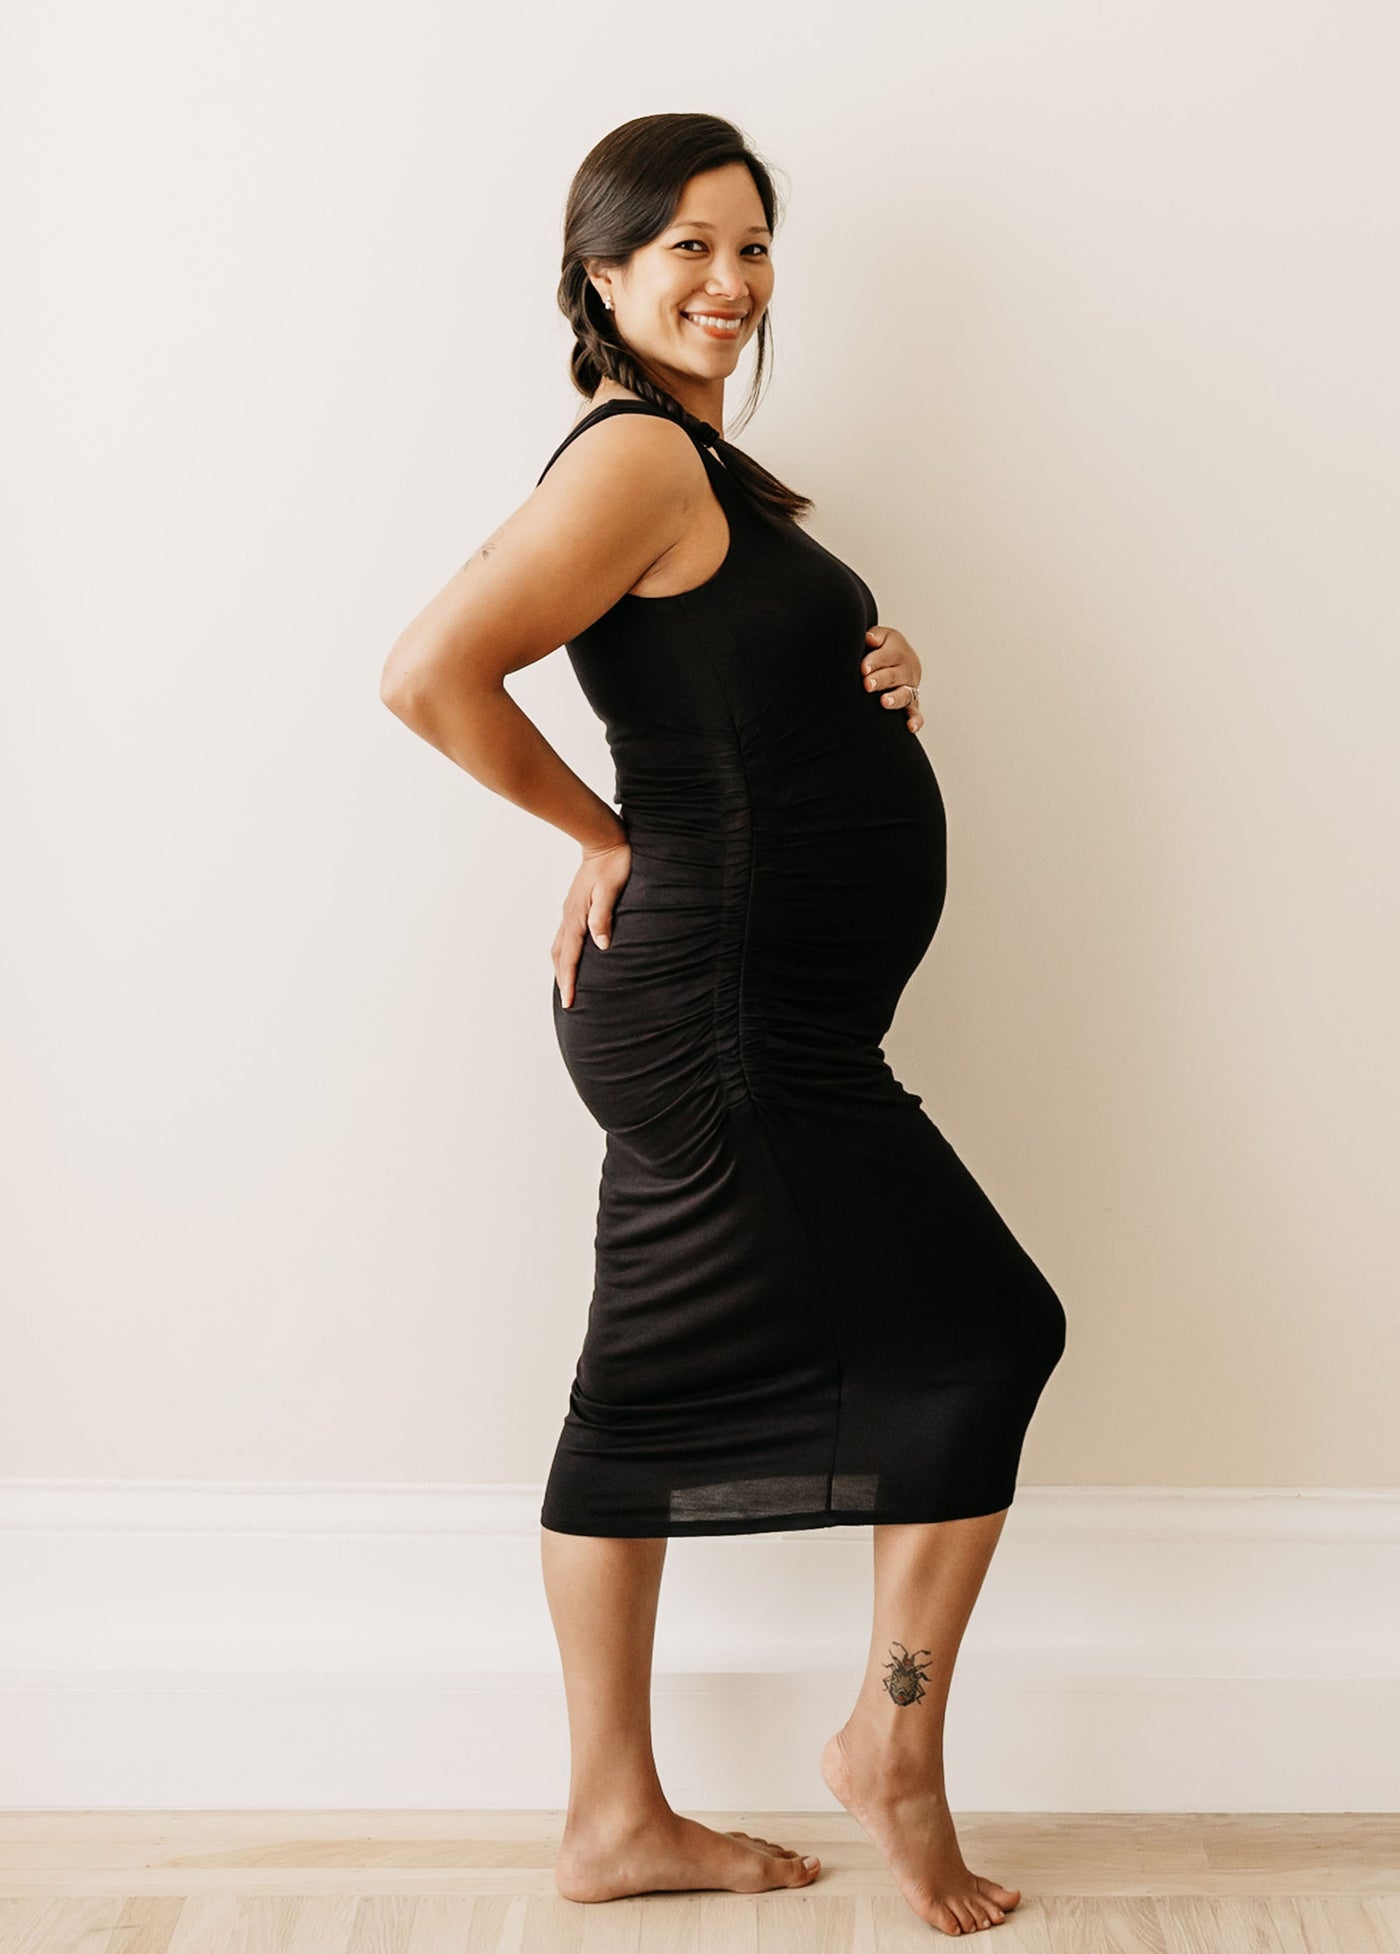 Franato  Stretch Seamless Tank Dress, Knee-length Maternity Dress,Suitable  for Layering Clothes 